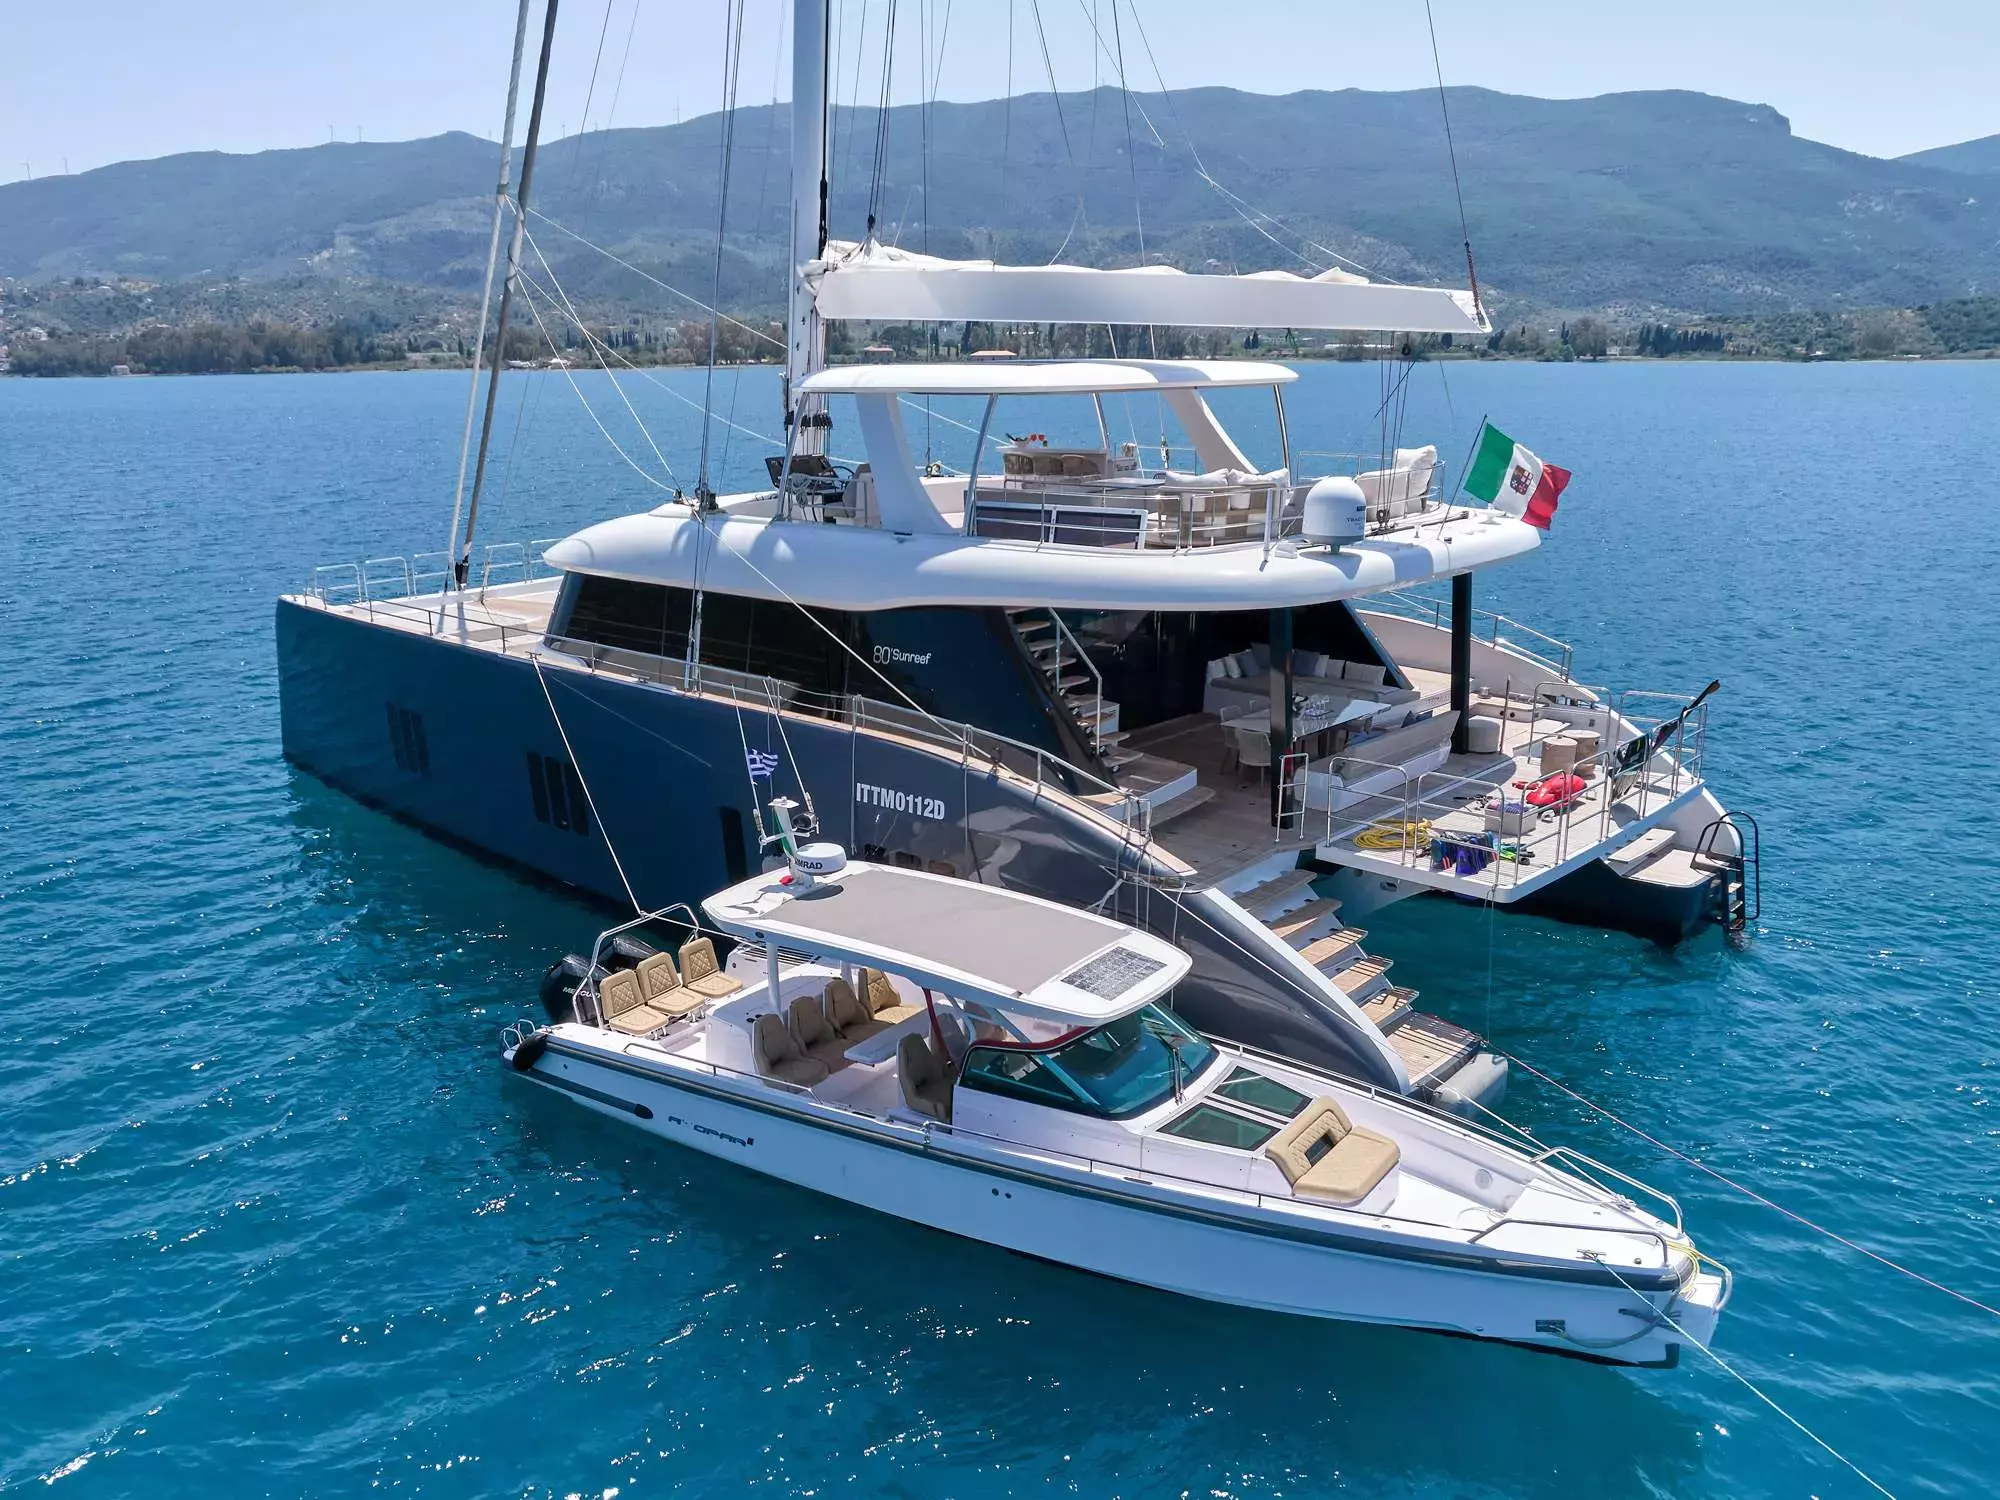 Genny by Sunreef Yachts - Special Offer for a private Luxury Catamaran Rental in Mykonos with a crew